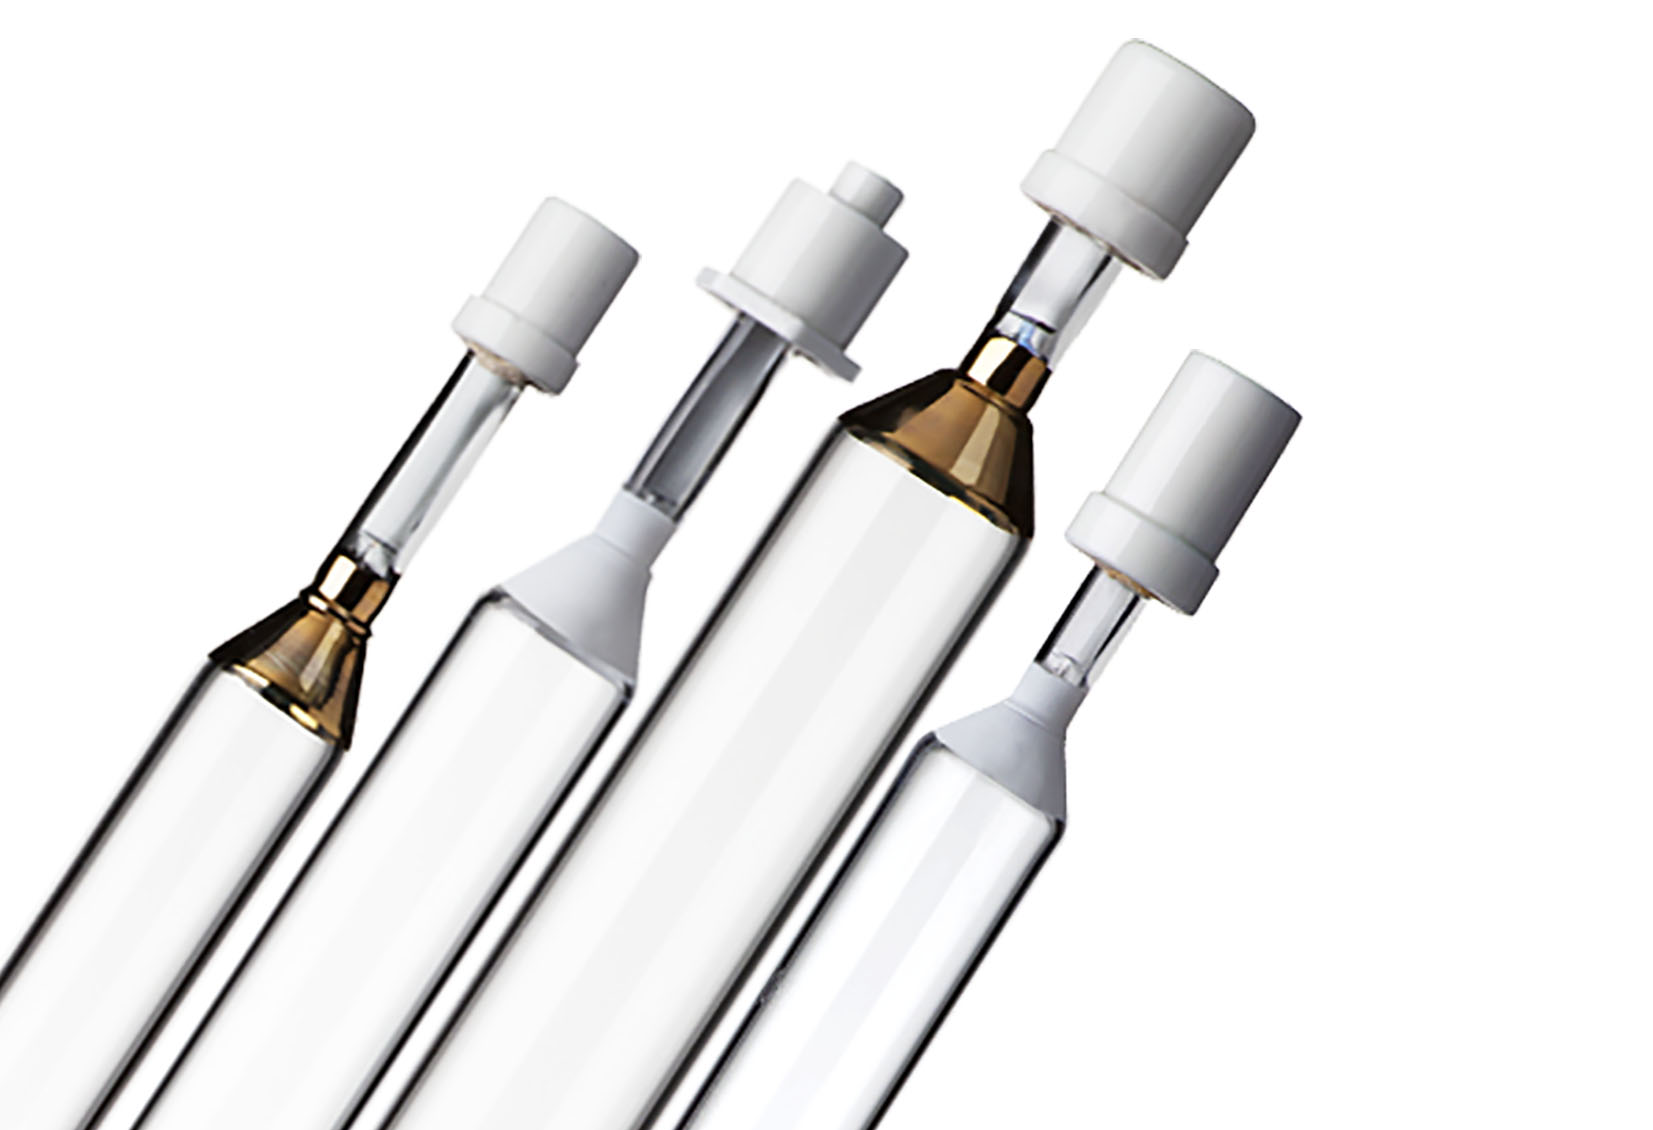 UV Lamps - Original and Replacement UV Curing Lamps